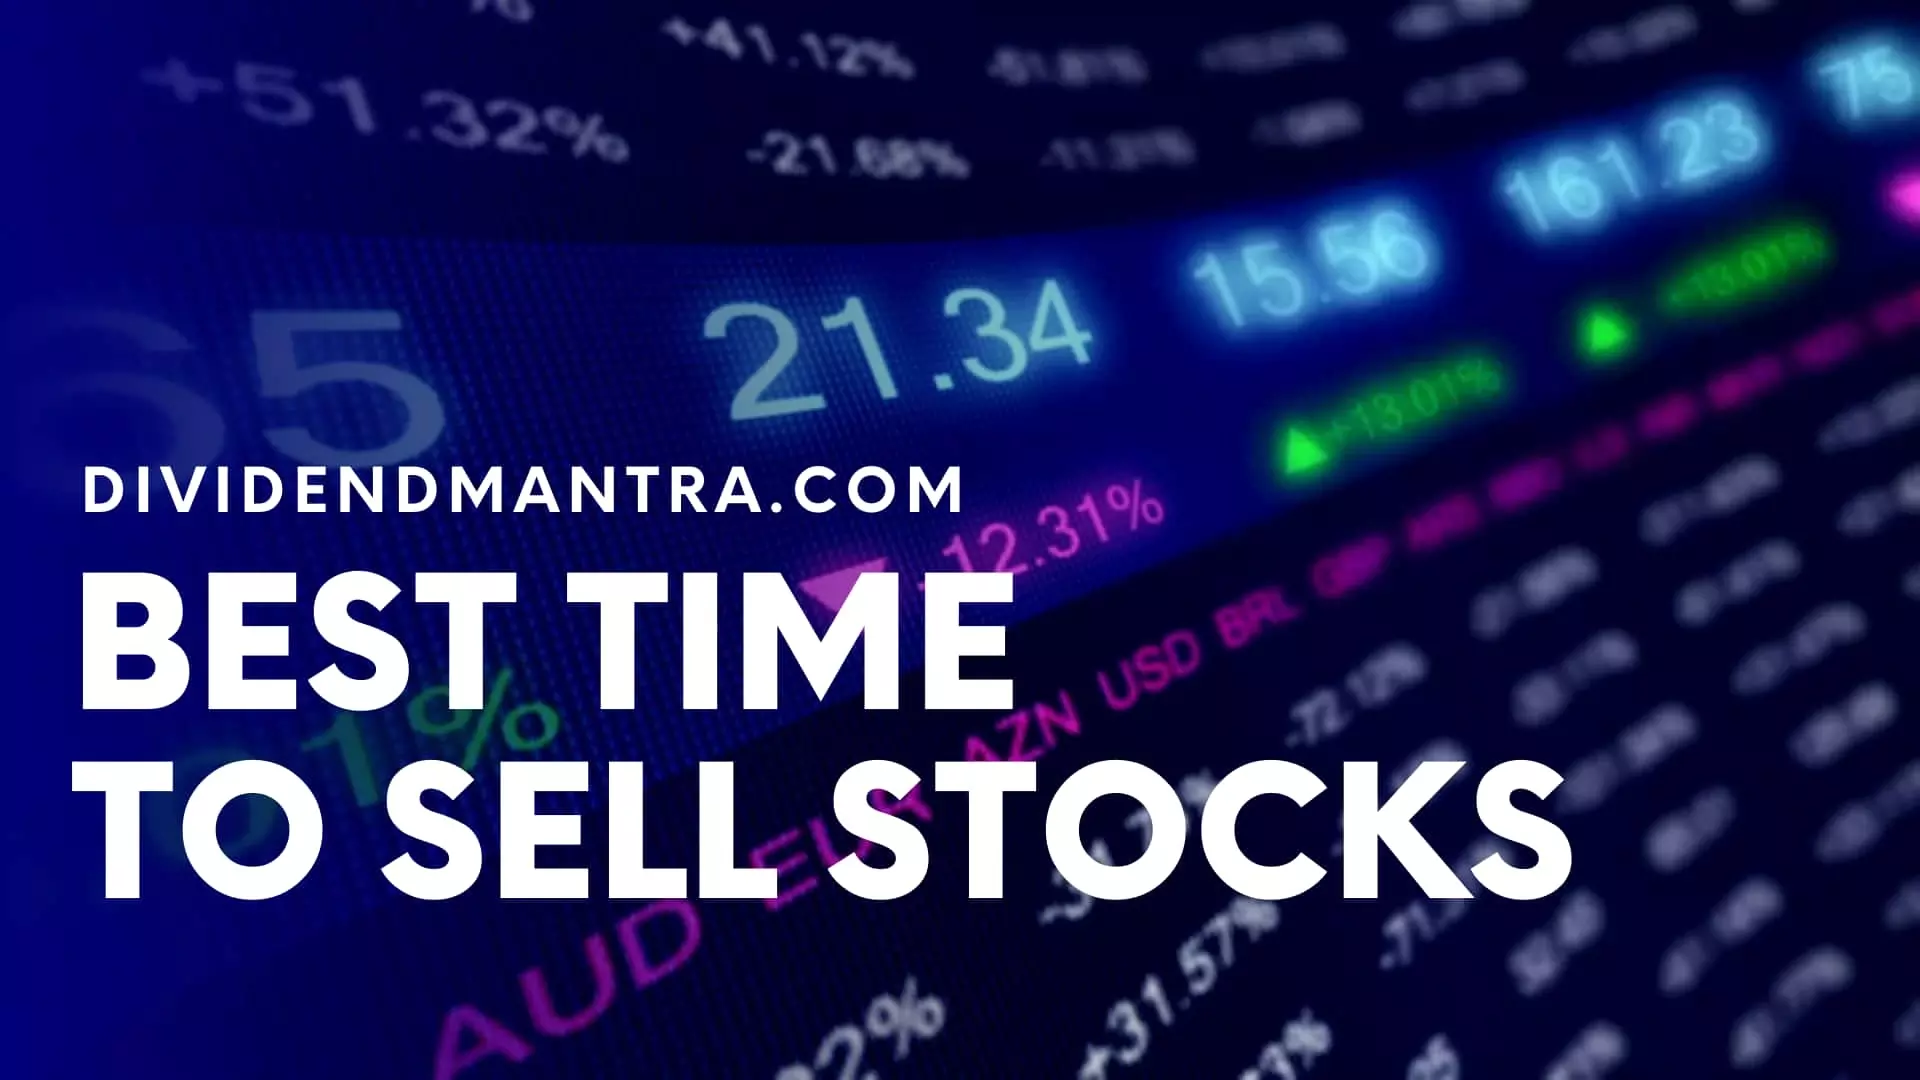 The Best Time To Sell Stocks